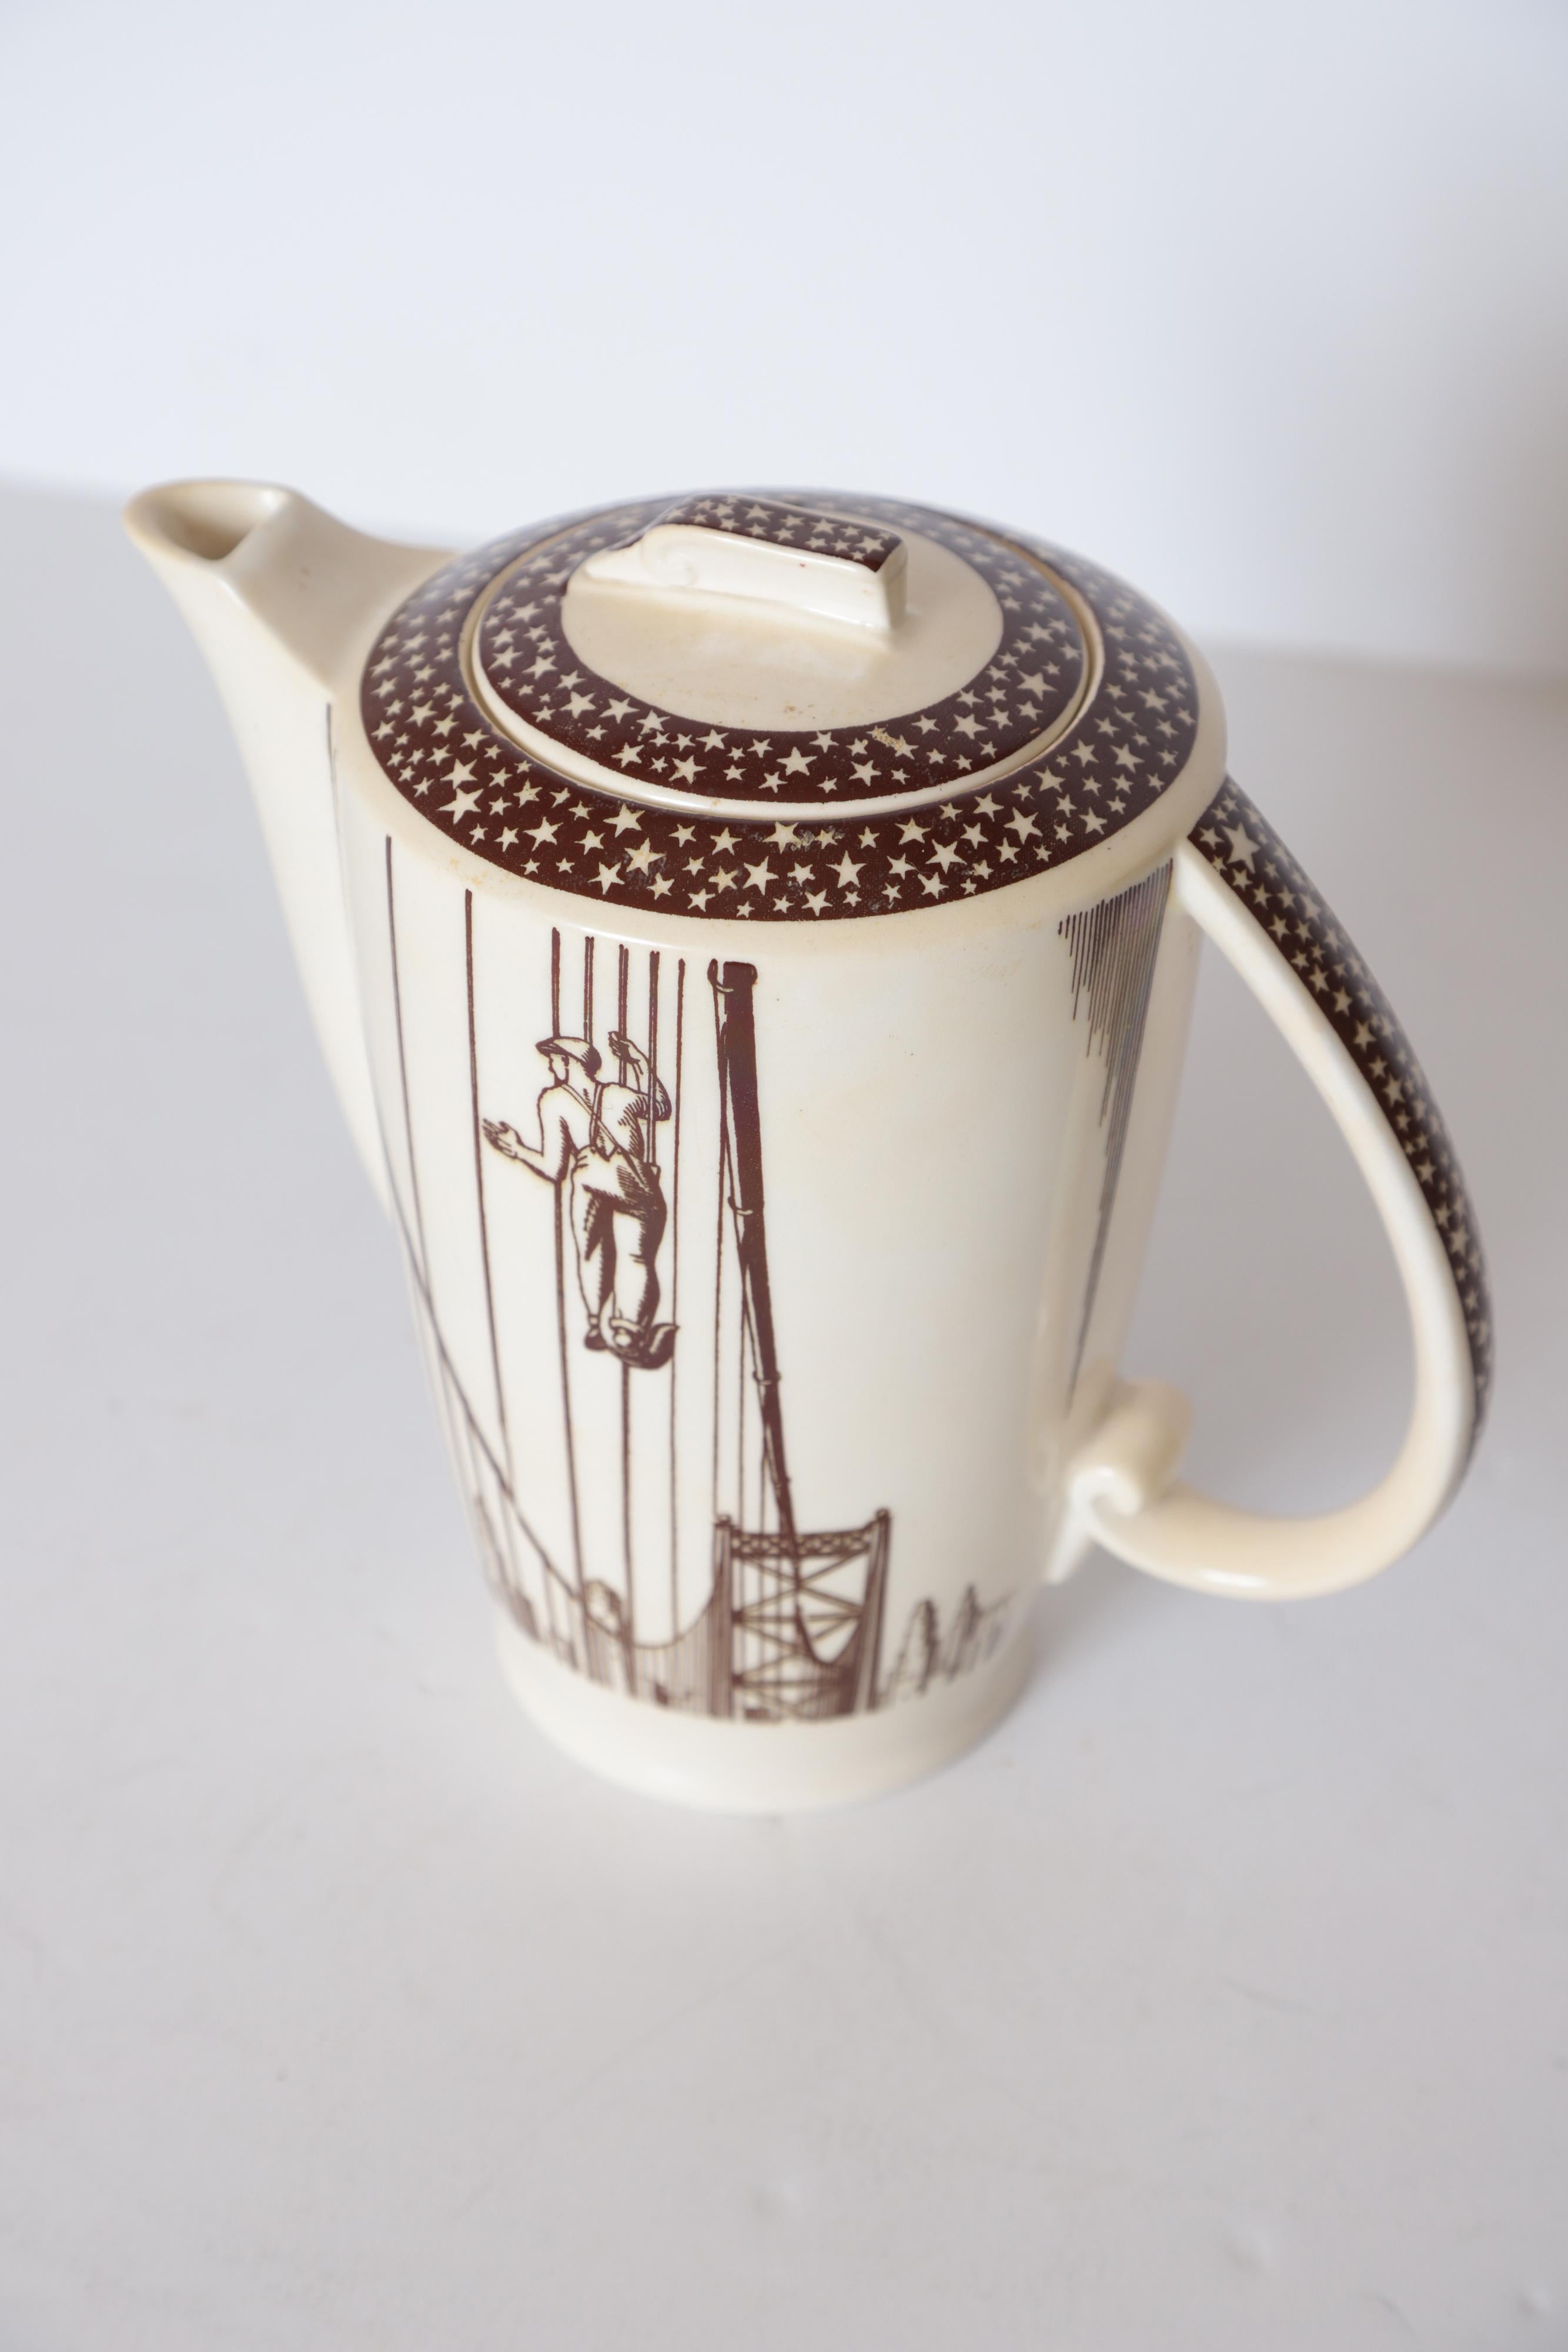 Art Deco Rockwell Kent our America coffee pot for Vernon Kilns cocktail pitcher

Classic Kent masculine machine age Industrial Design.
Worker on a suspension bridge like the Golden Gate or Brooklyn bridges with city-scape skyscraper background.